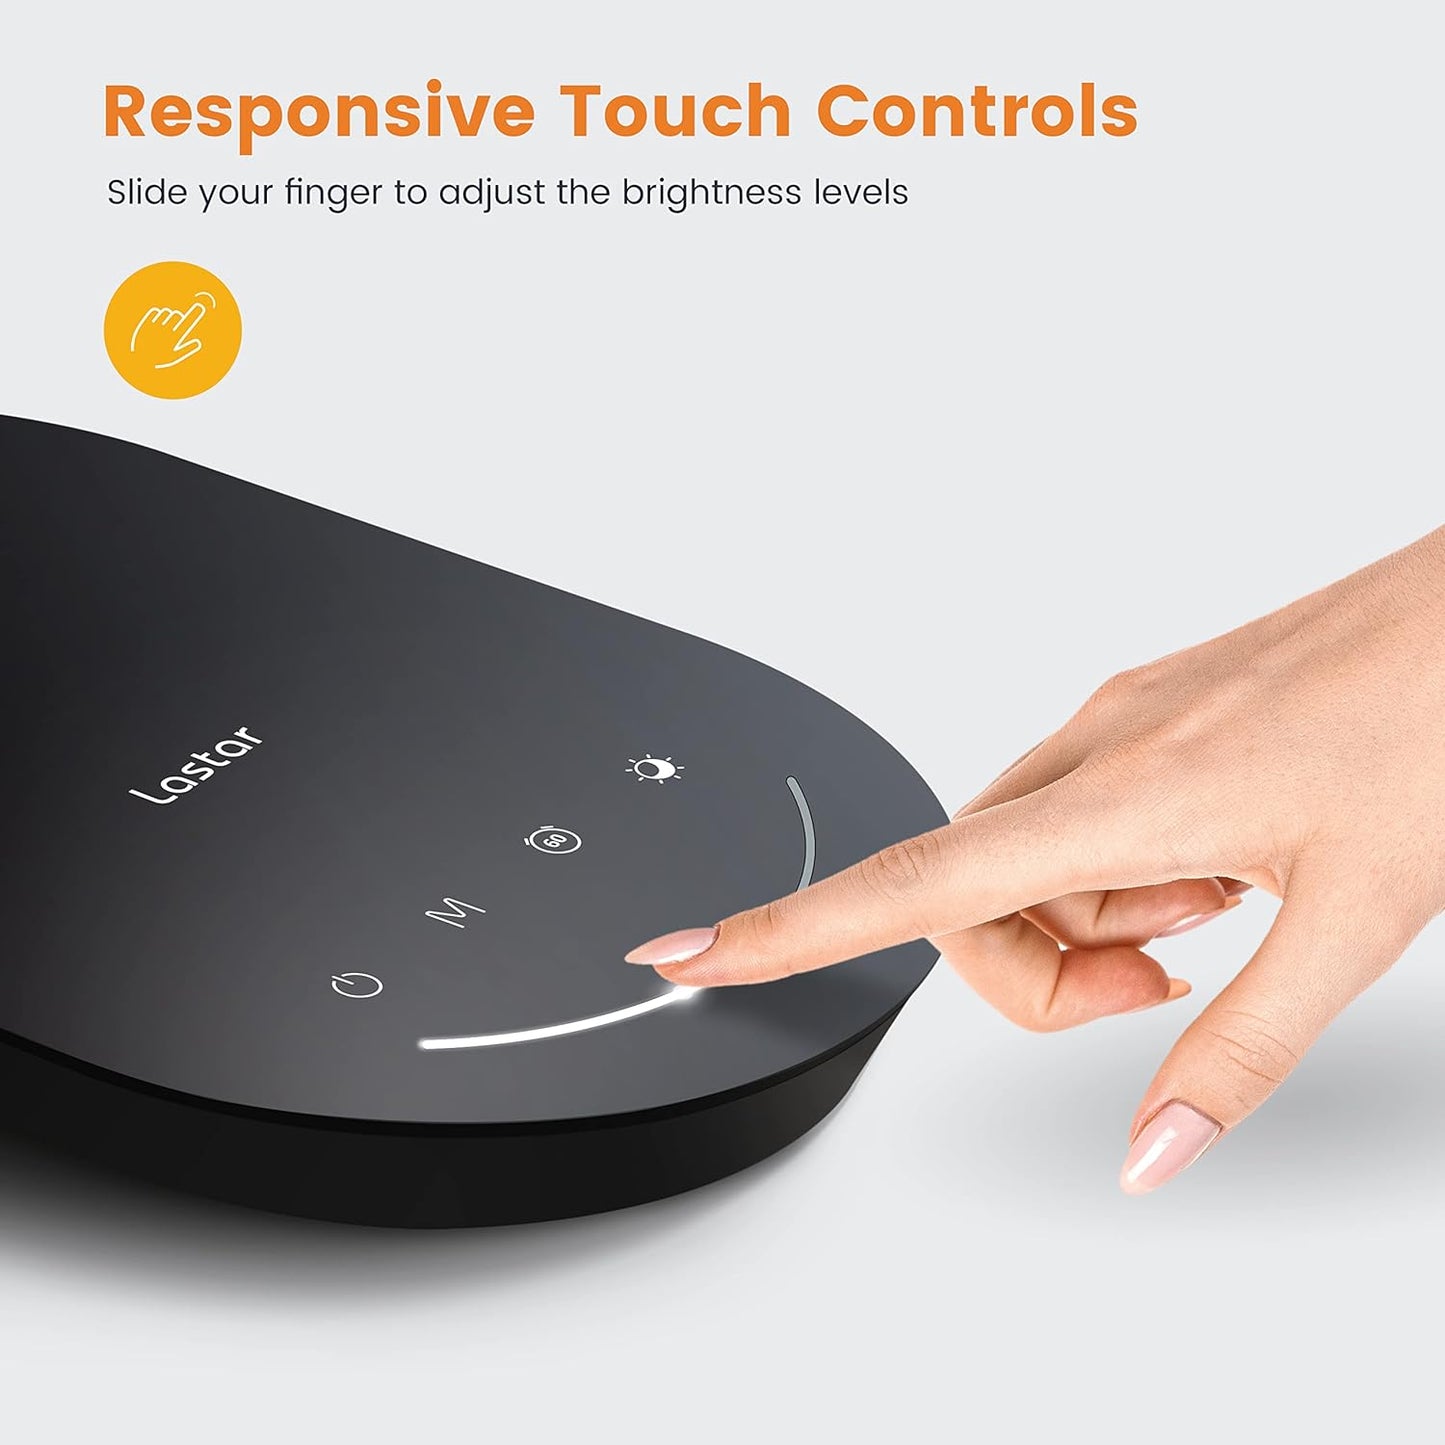 Responsive Touch Controls Lamp